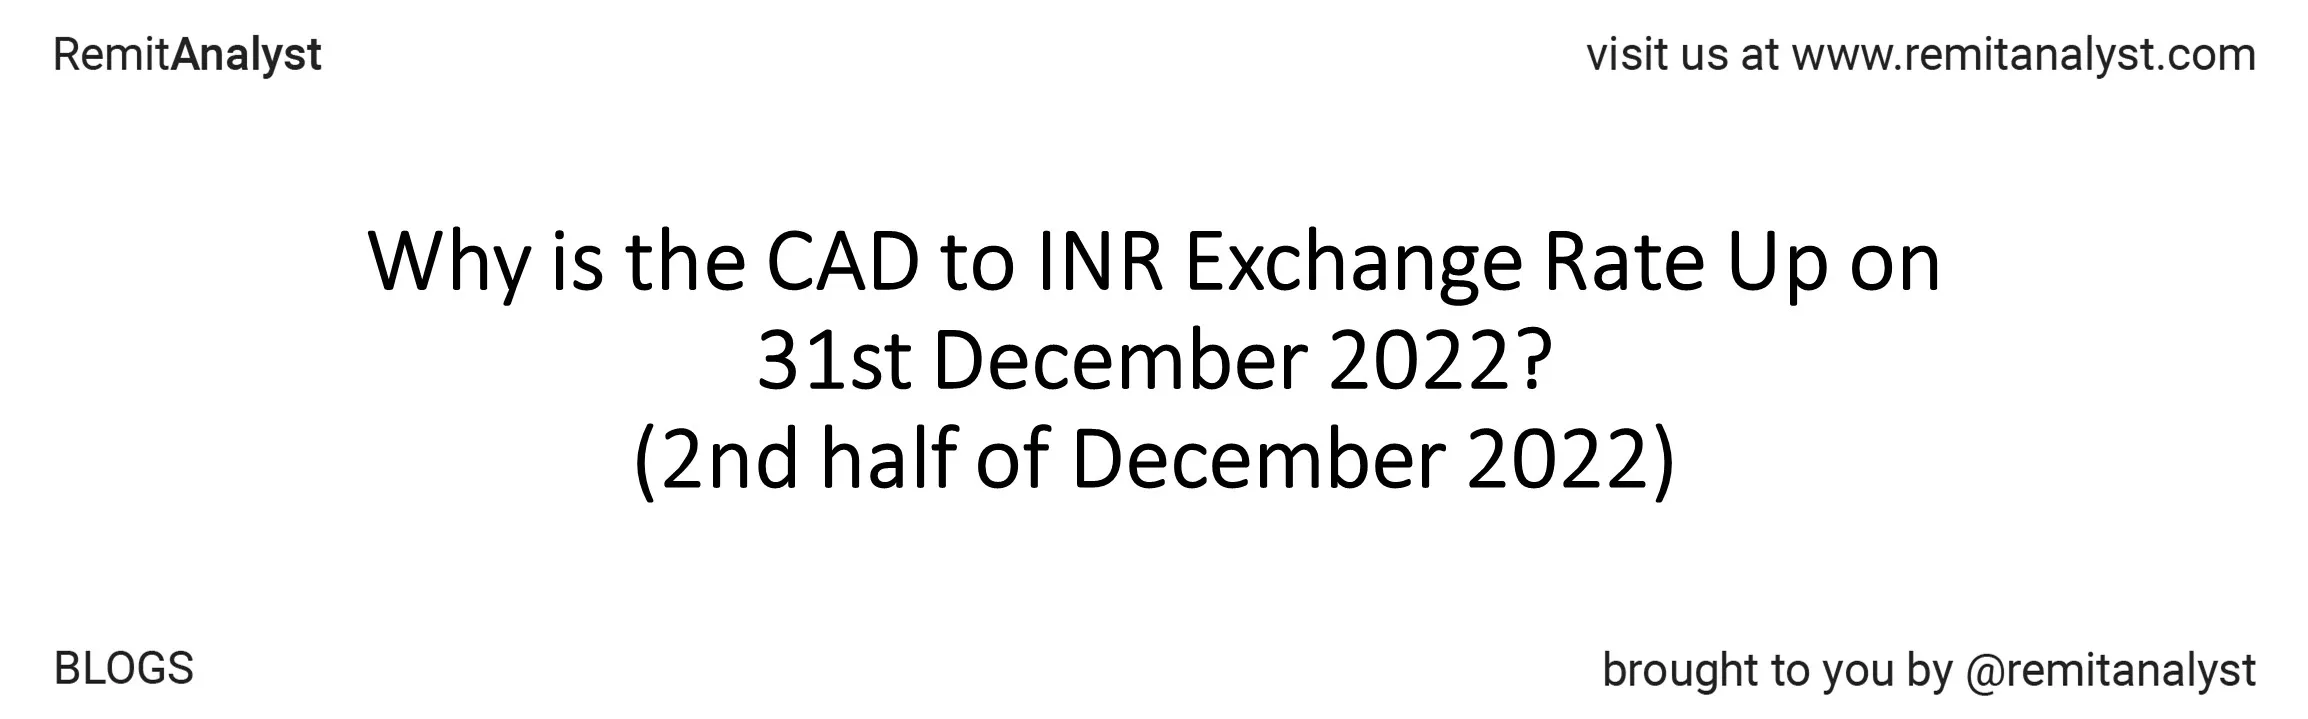 cad-to-inr-exchange-rate-from-16-dec-2022-to-31-dec-2022-title